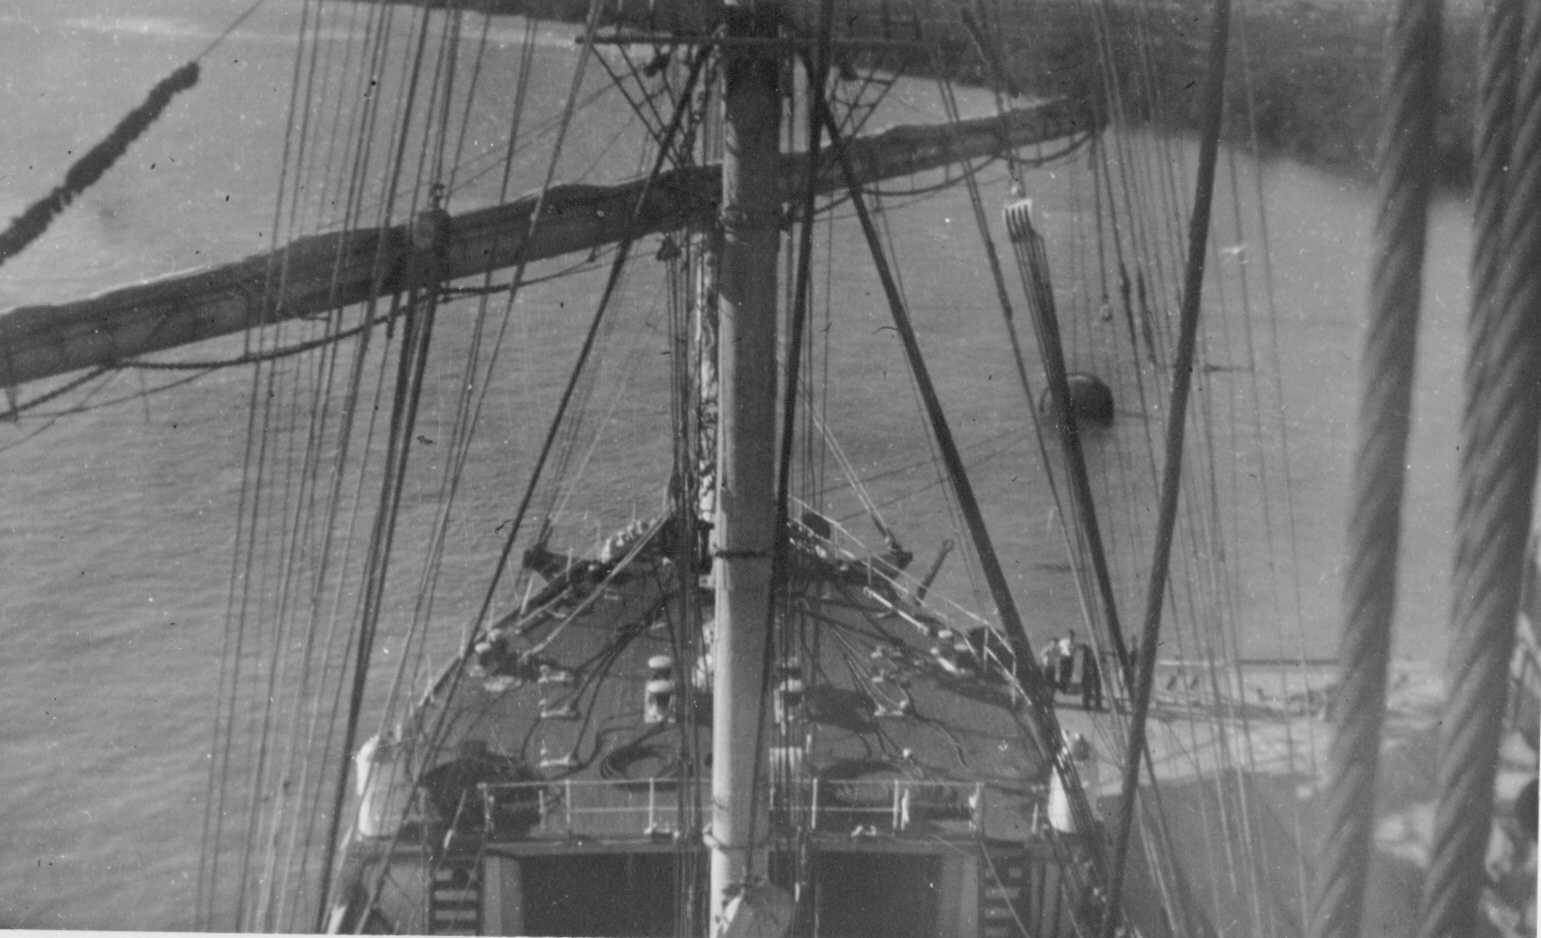 Aerial view of mast, rigging and deck.